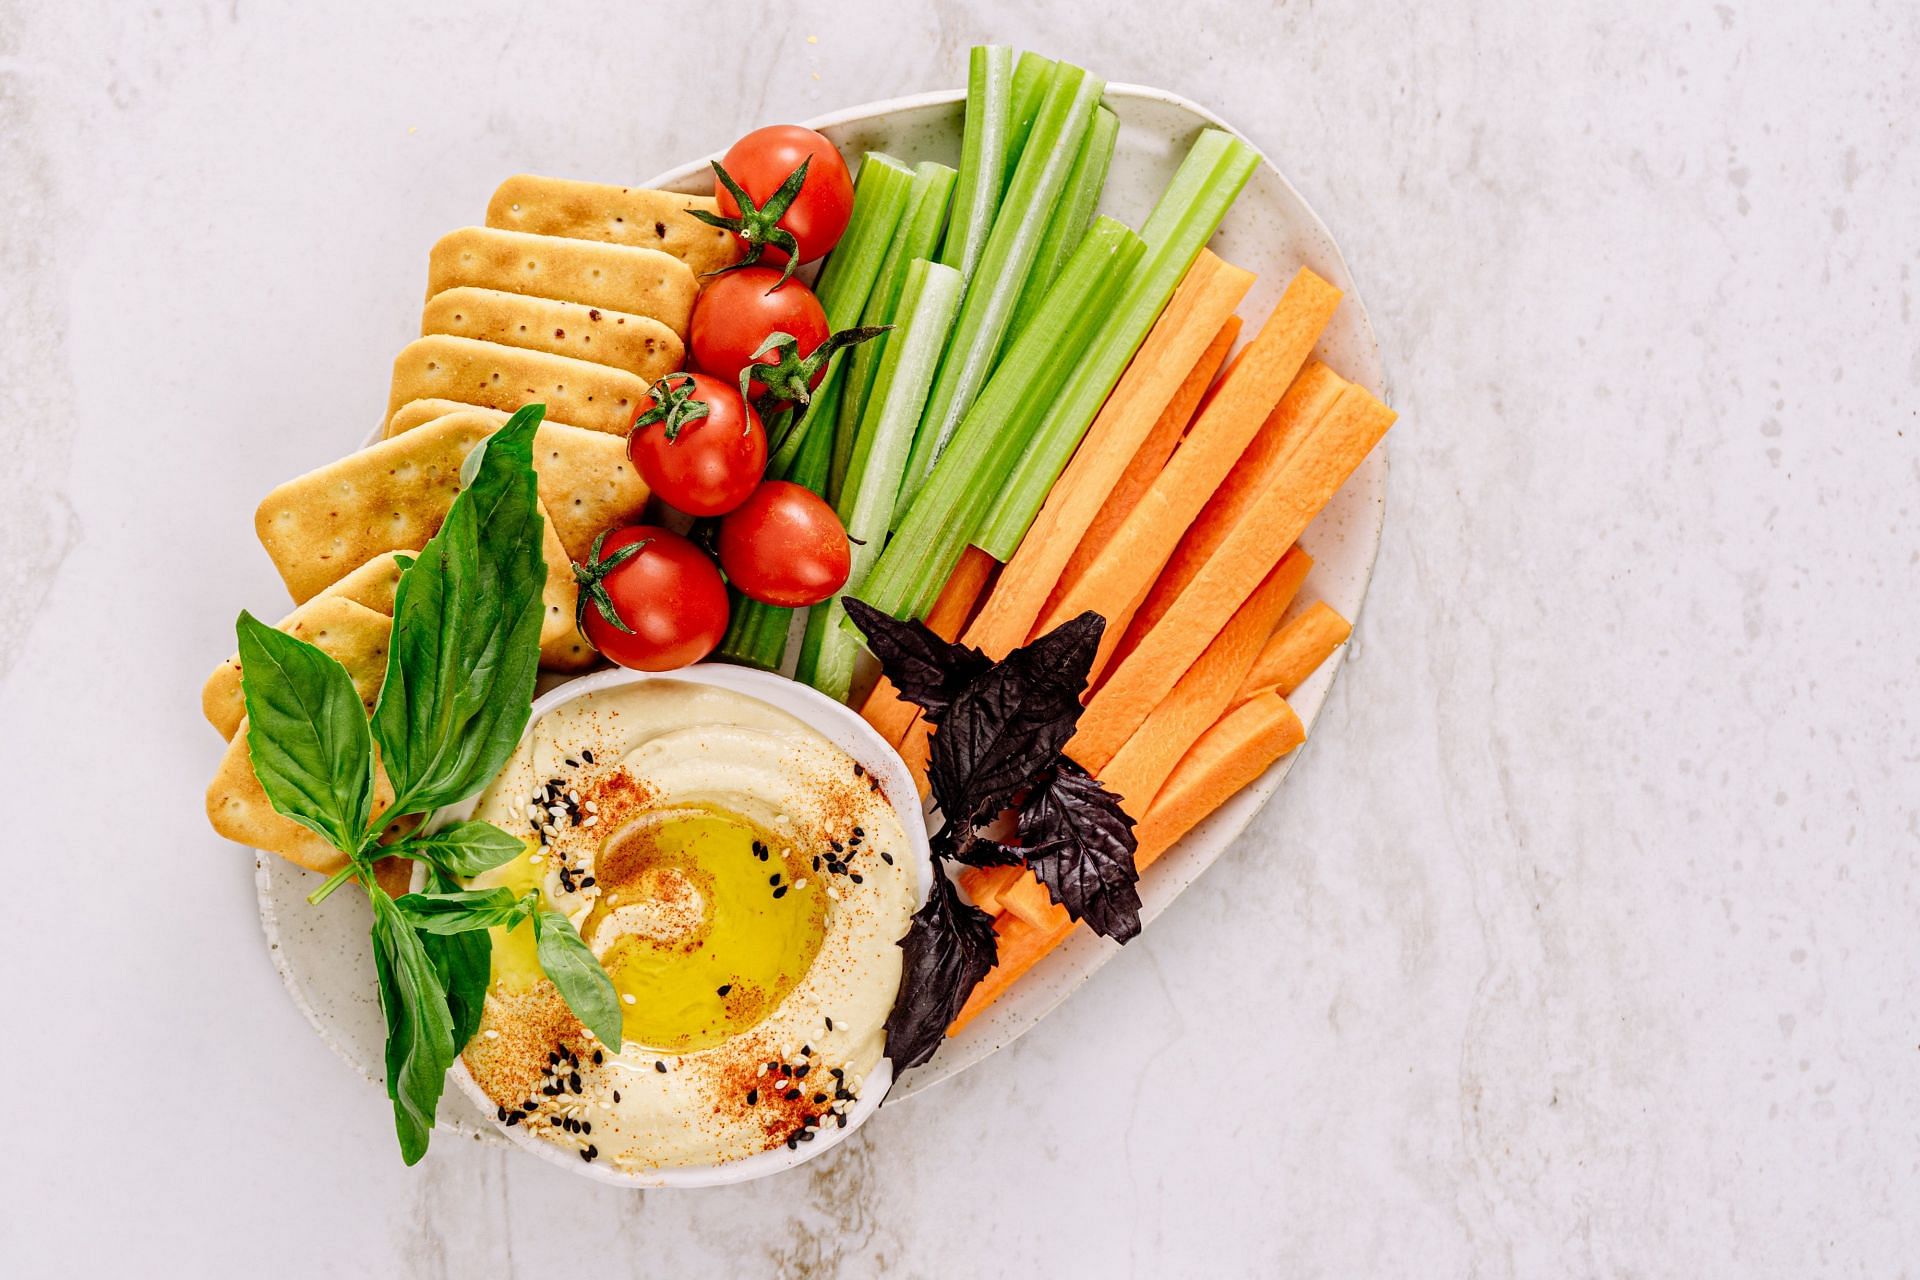 Wondering is hummus good for you? Make it healthier by pairing it with crunchy vegetables. (Image via Pexels/Antoni Shkraba)